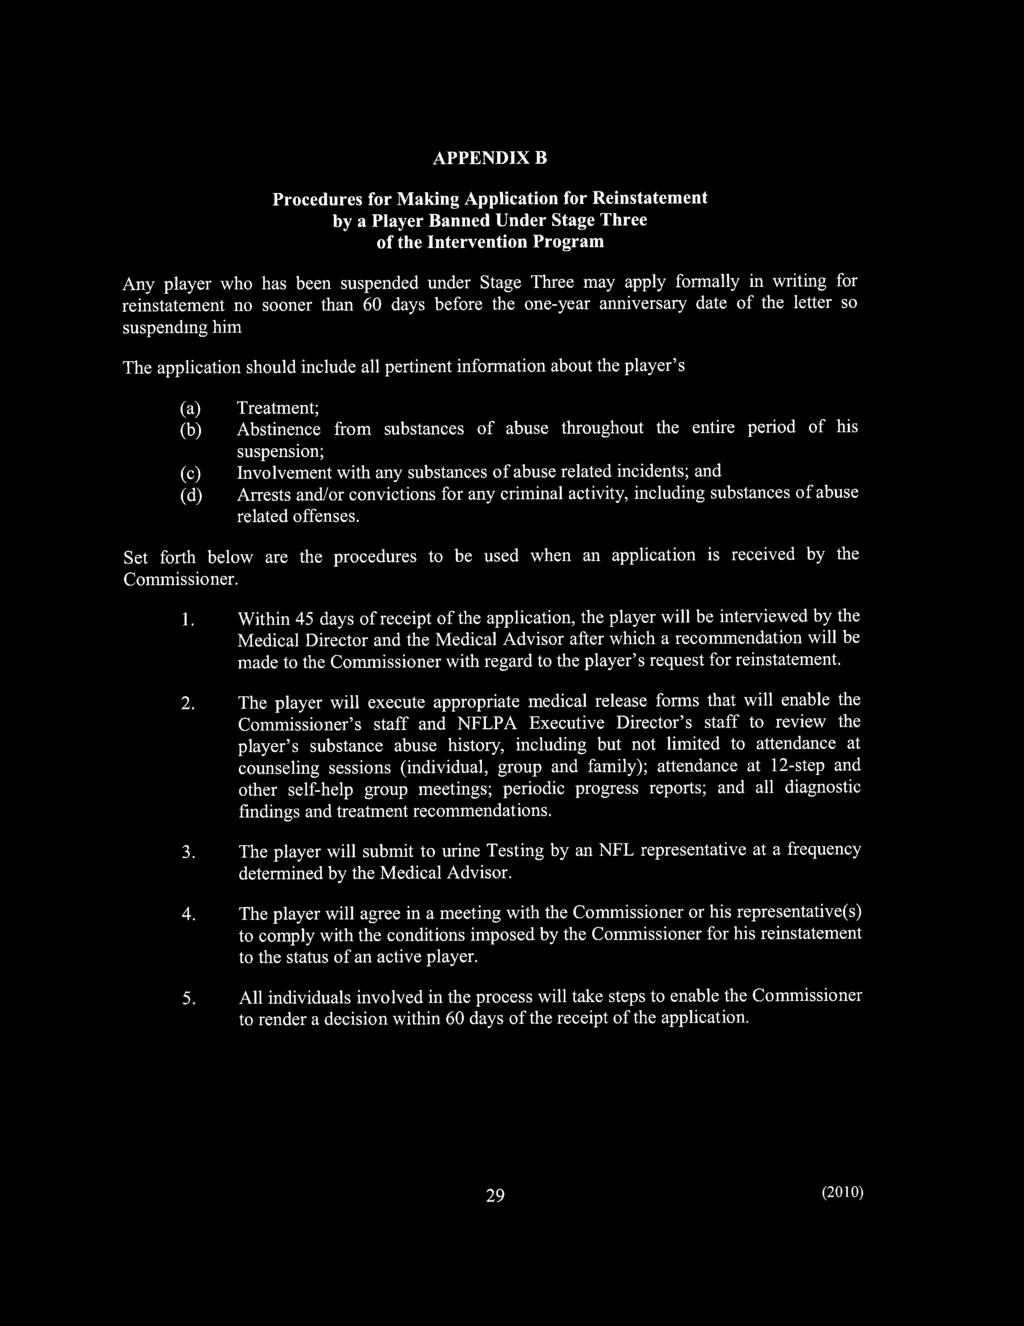 APPENDIX B Procedures for Making Application for Reinstatement by a Player Banned Under Stage Three of the Intervention Program Any player who has been suspended under Stage Three may apply formally